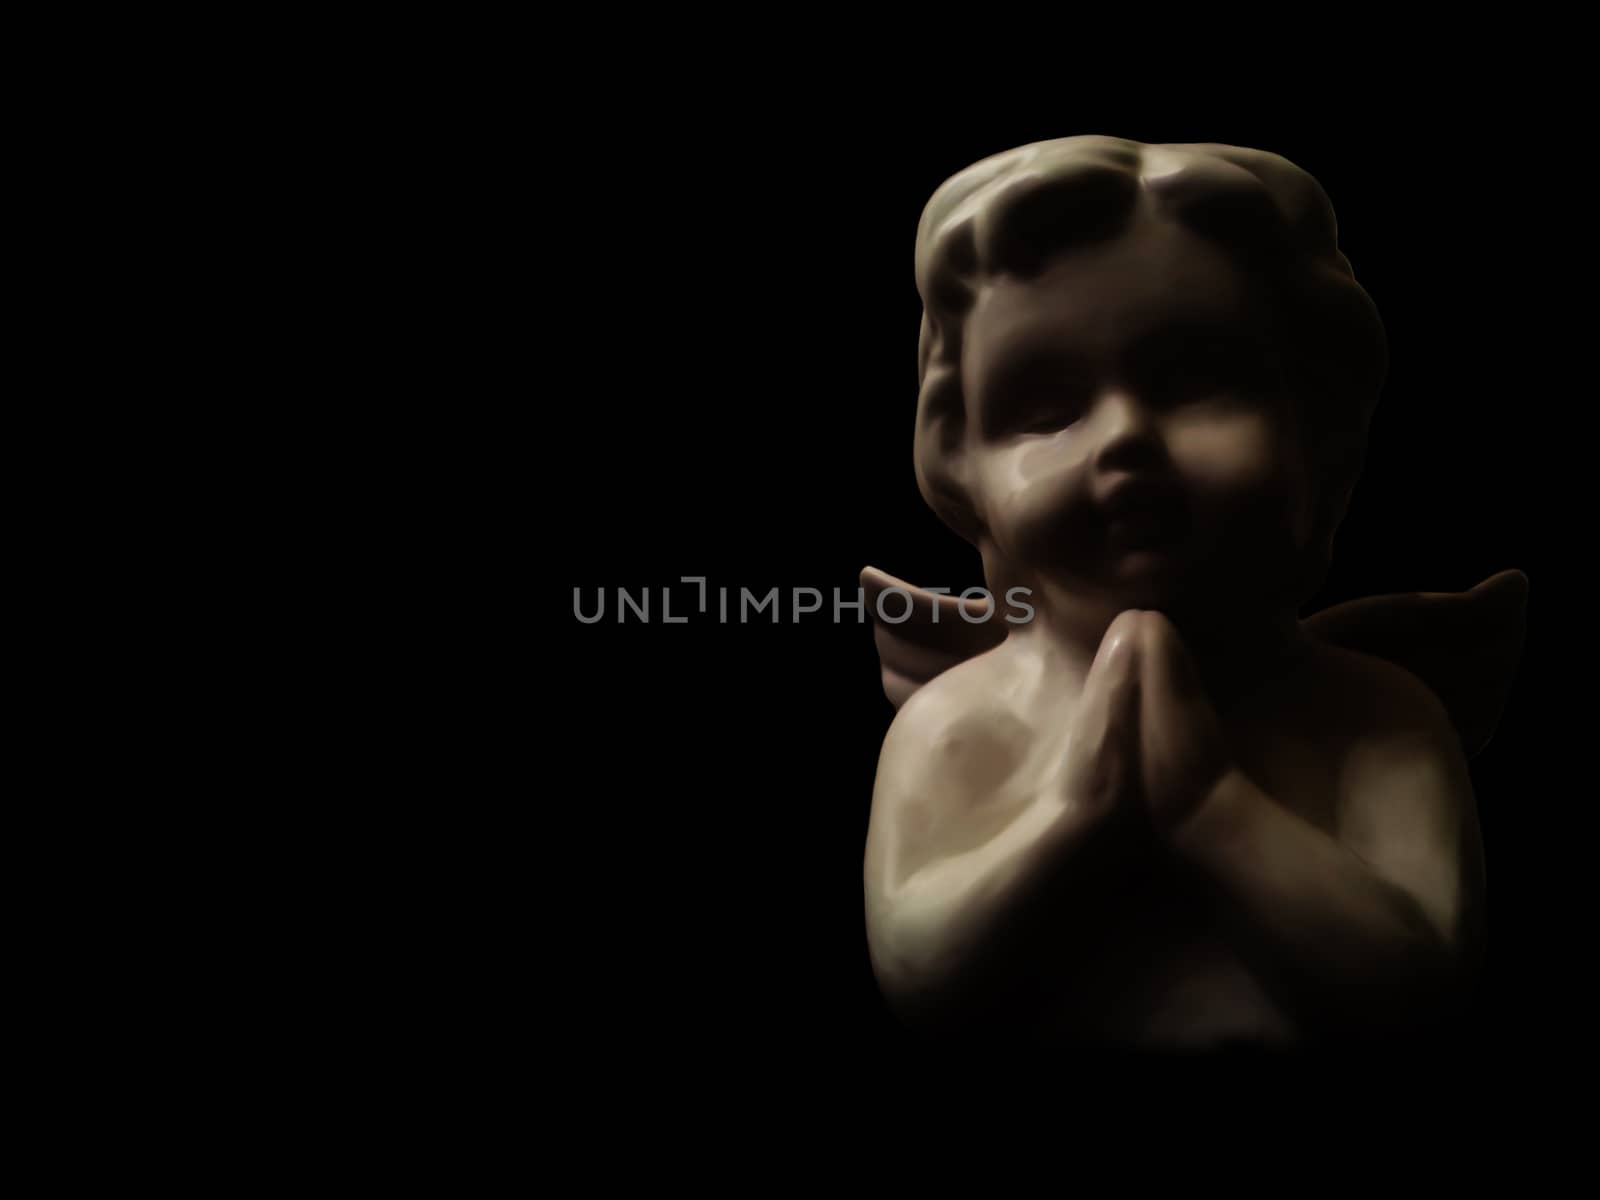 Angel praying in the dark, with copyspace by fjanecic